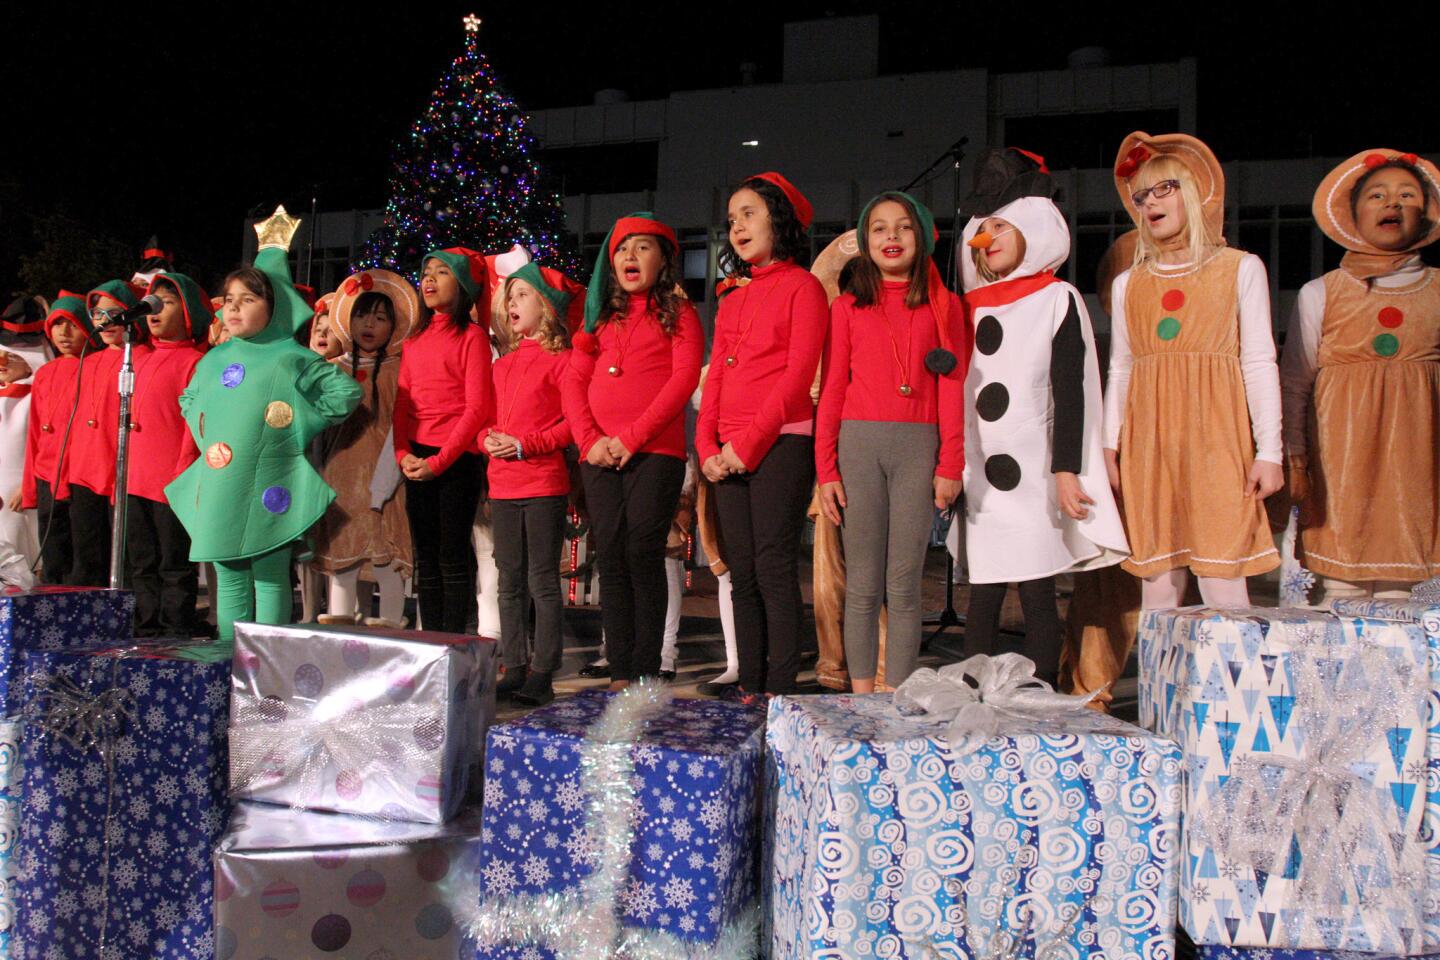 Students from Columbus Elementary School sang Christmas songs at the tree lighting ceremony at Perkins Plaza in Glendale on Wednesday, Dec. 2, 2015.